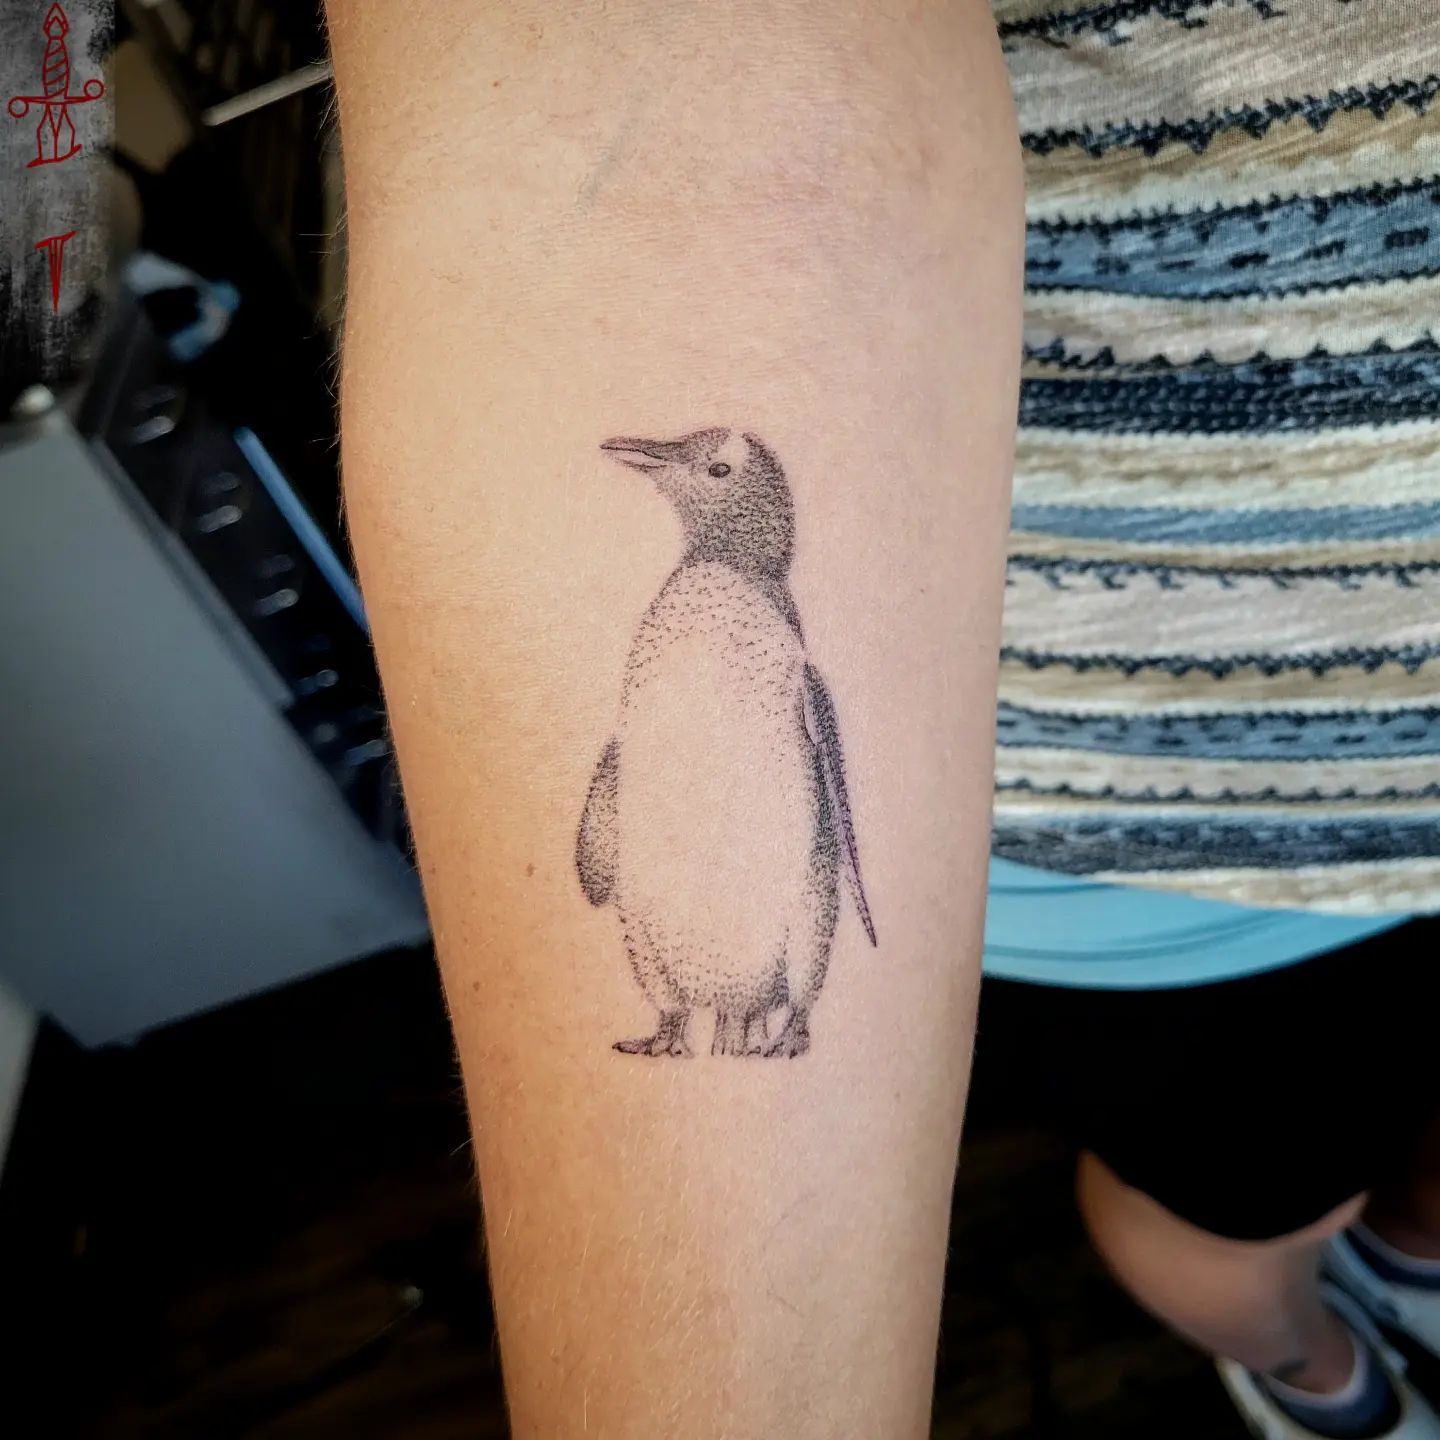 Here is a splendid dotwork penguin tattoo to get. It look so simple but the beauty is in simplicity, isn't it?